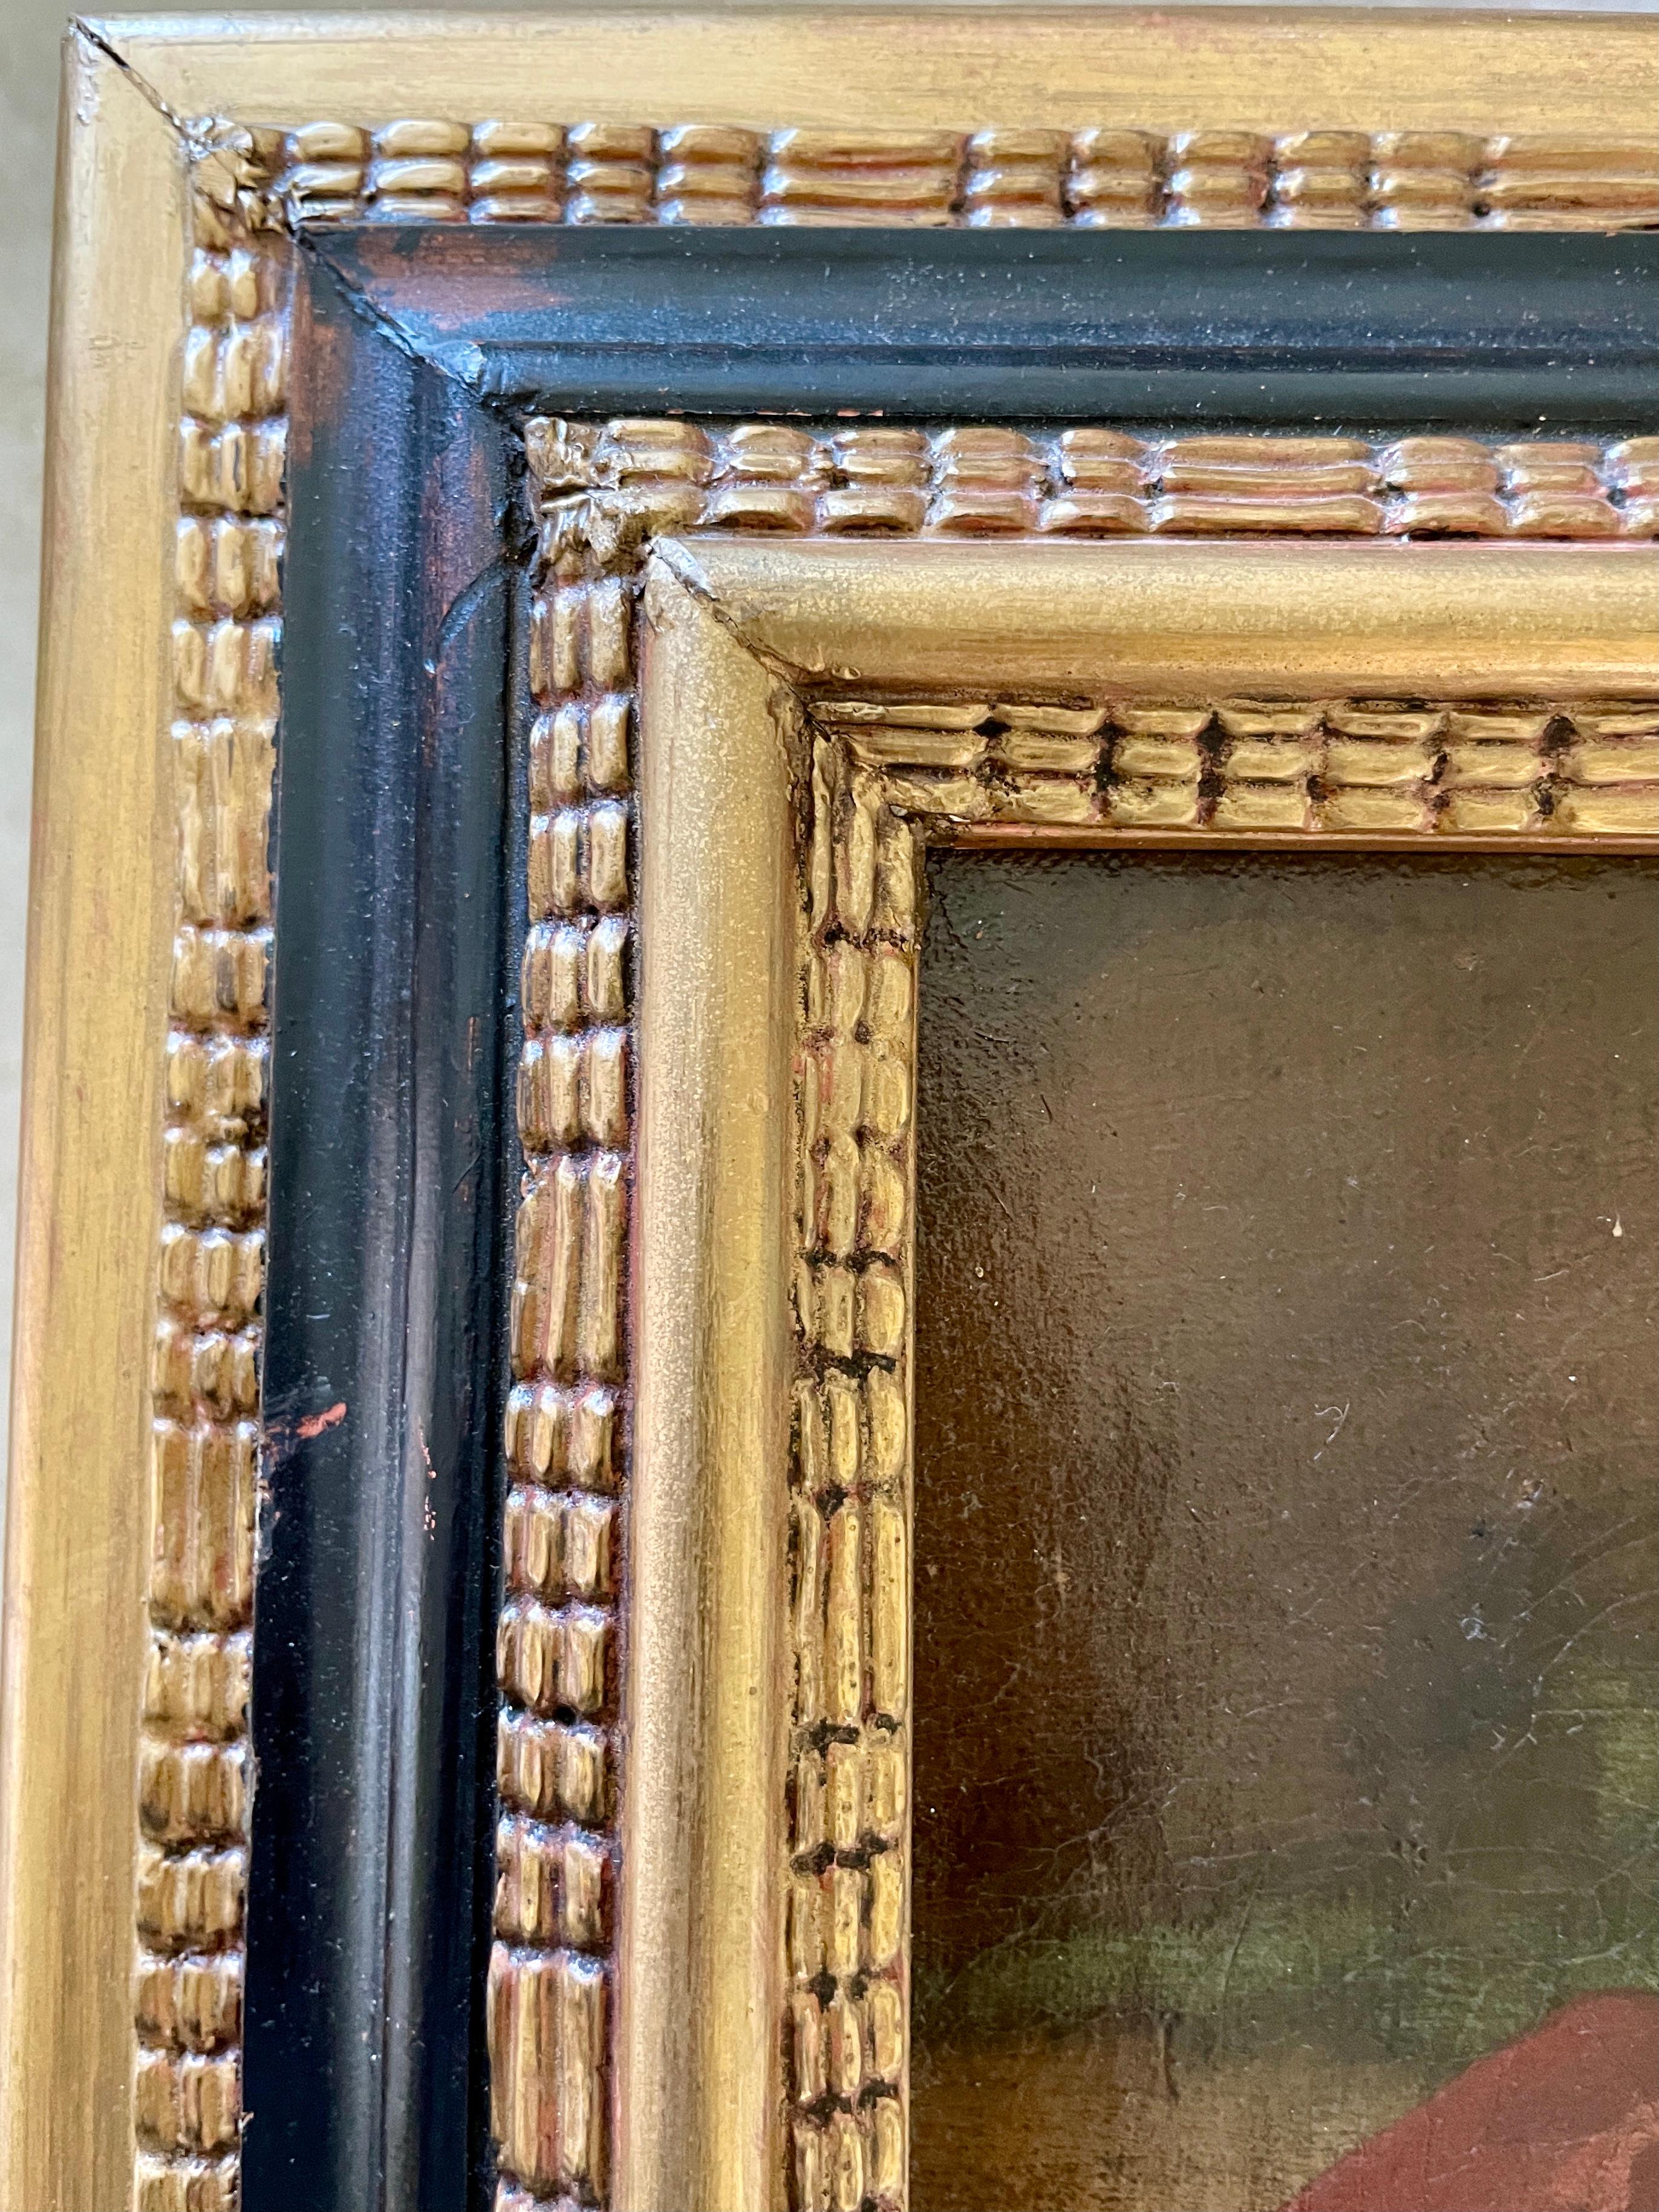 Beautiful French Old Master Painting of a Child. Gorgeous details painted on canvas. This is an early 18th Century original old master painting. Nice simple frame too that allows the eye to focus in the painting. Add some French Style to your home. 